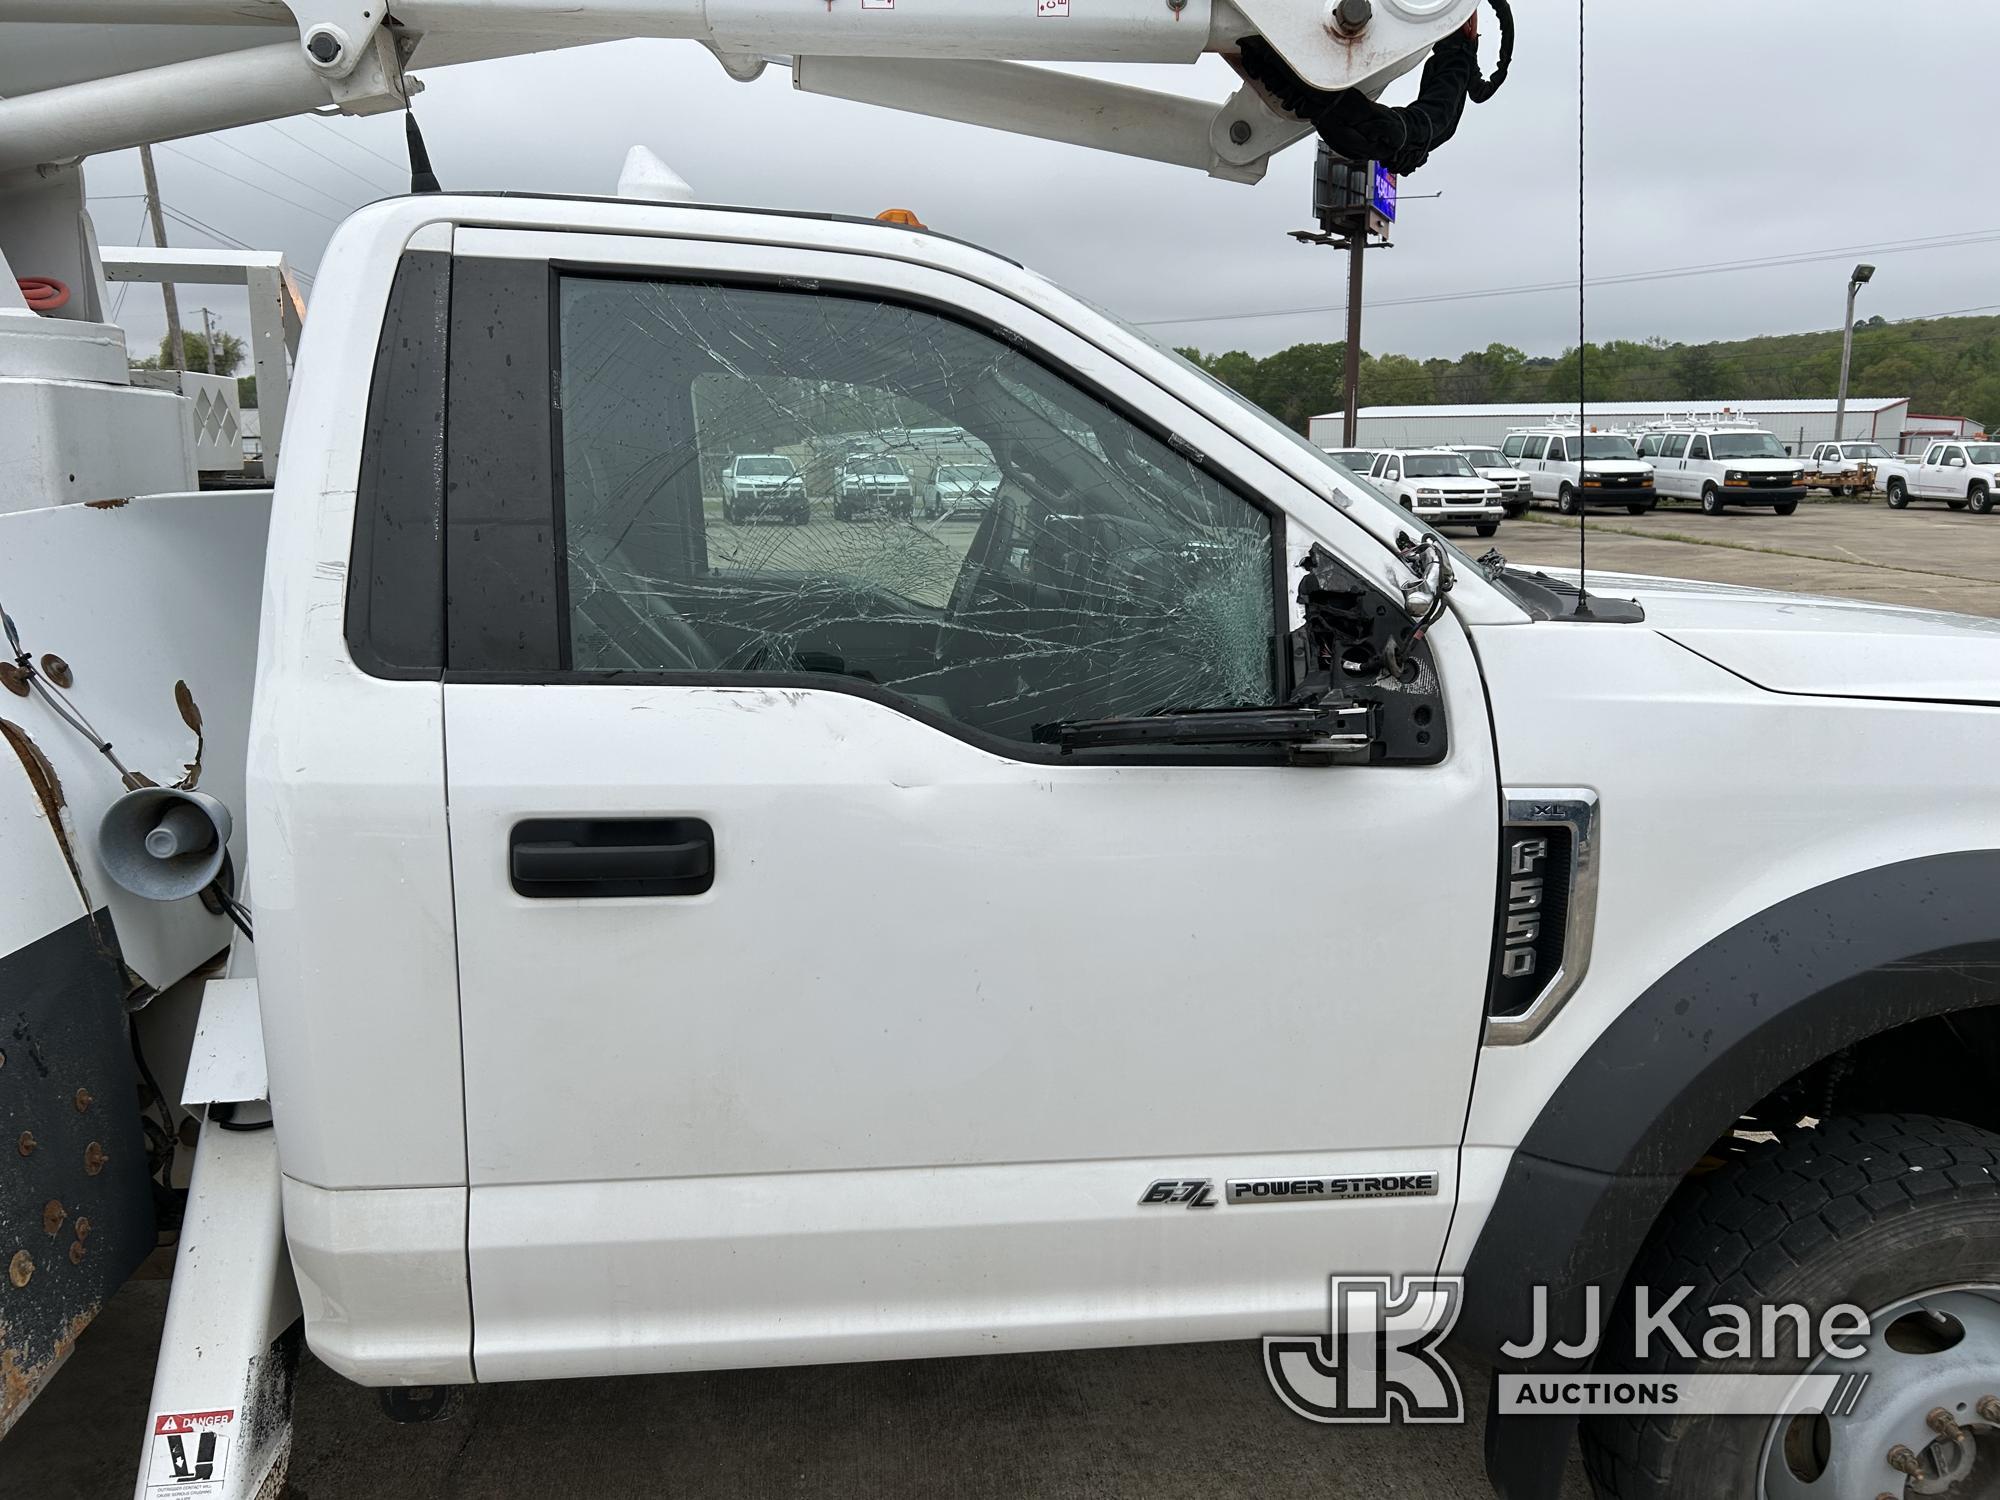 (Conway, AR) ETI ETC40IH, Articulating & Telescopic Bucket Truck mounted behind cab on 2017 Ford F55